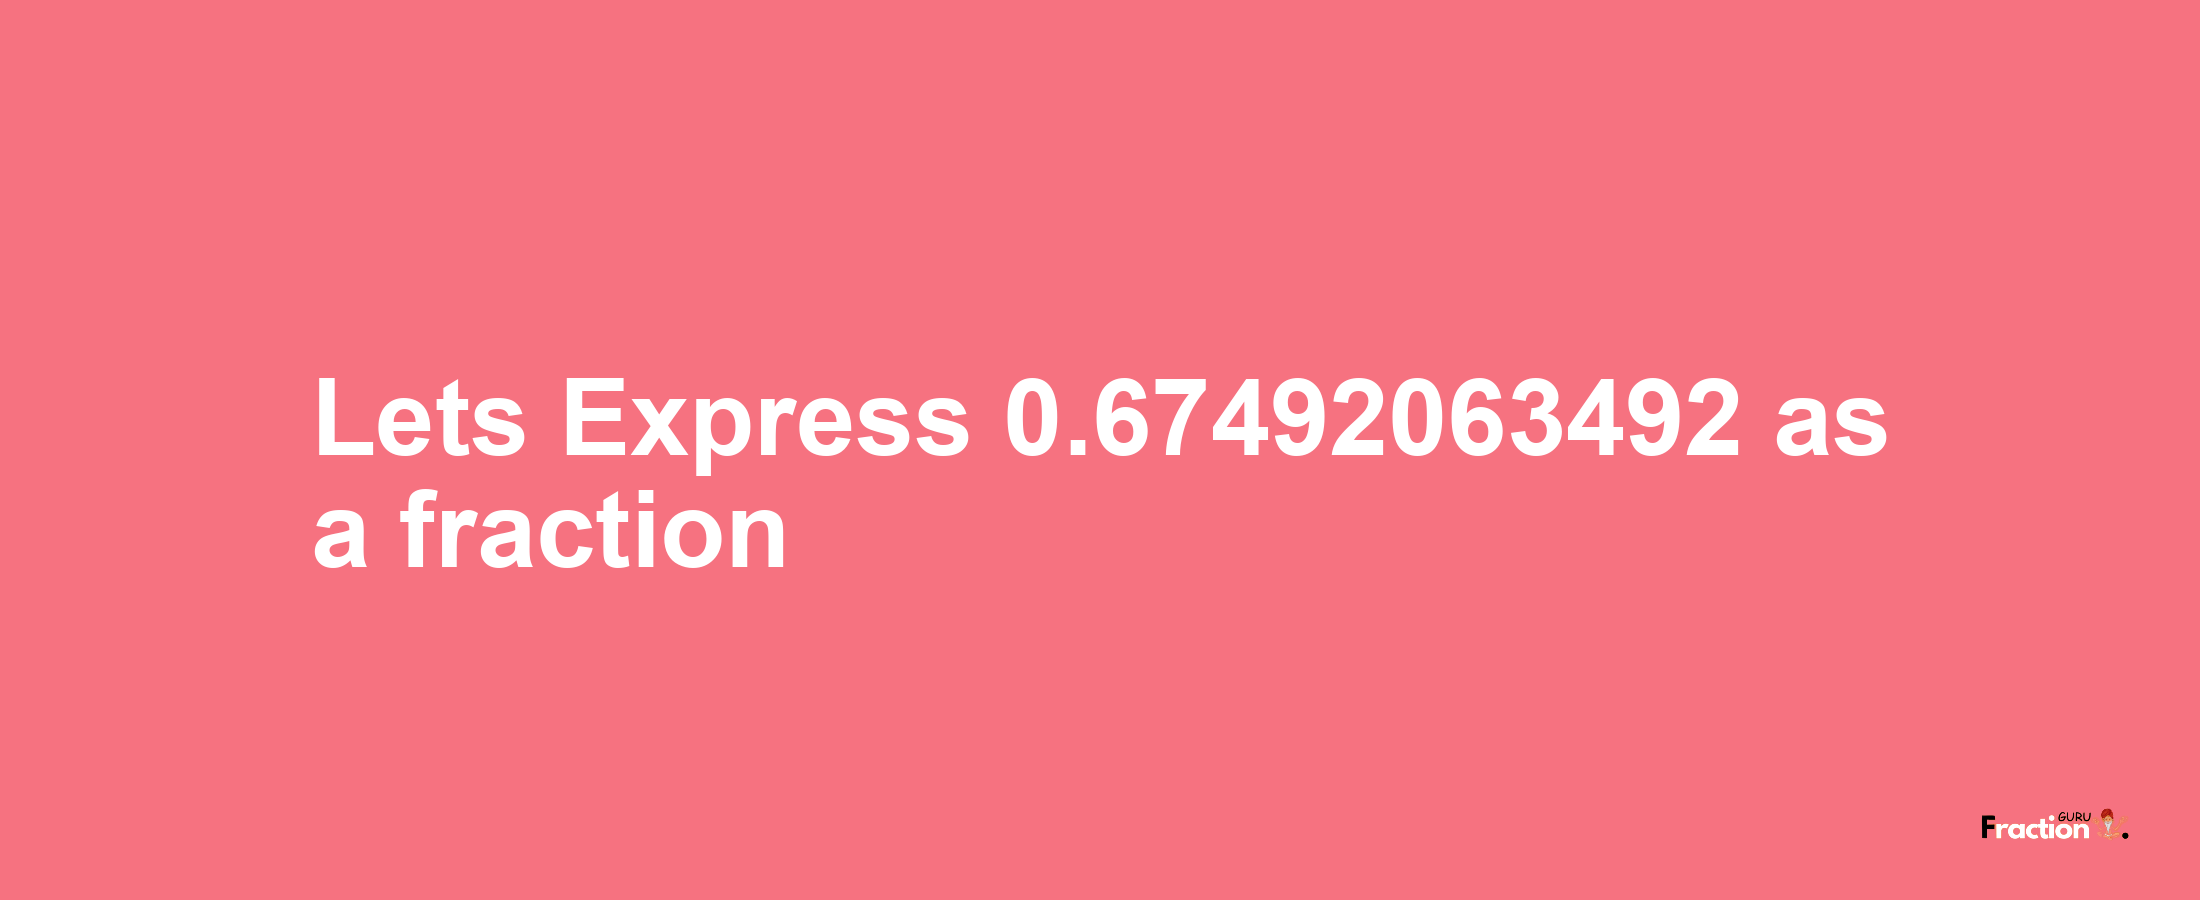 Lets Express 0.67492063492 as afraction